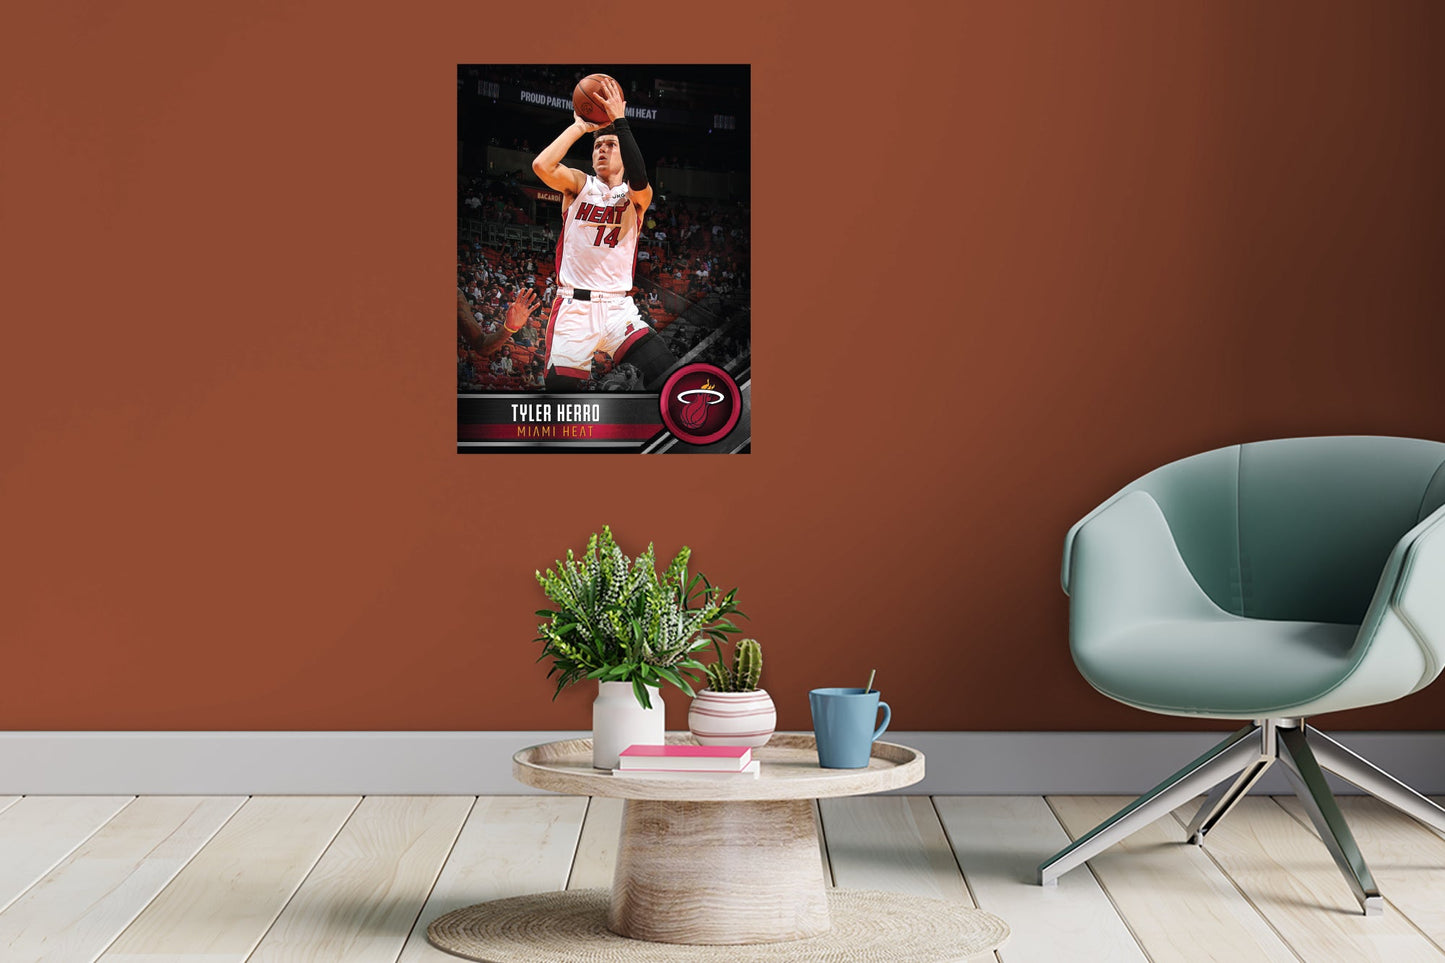 Miami Heat: Tyler Herro Poster - Officially Licensed NBA Removable Adhesive Decal